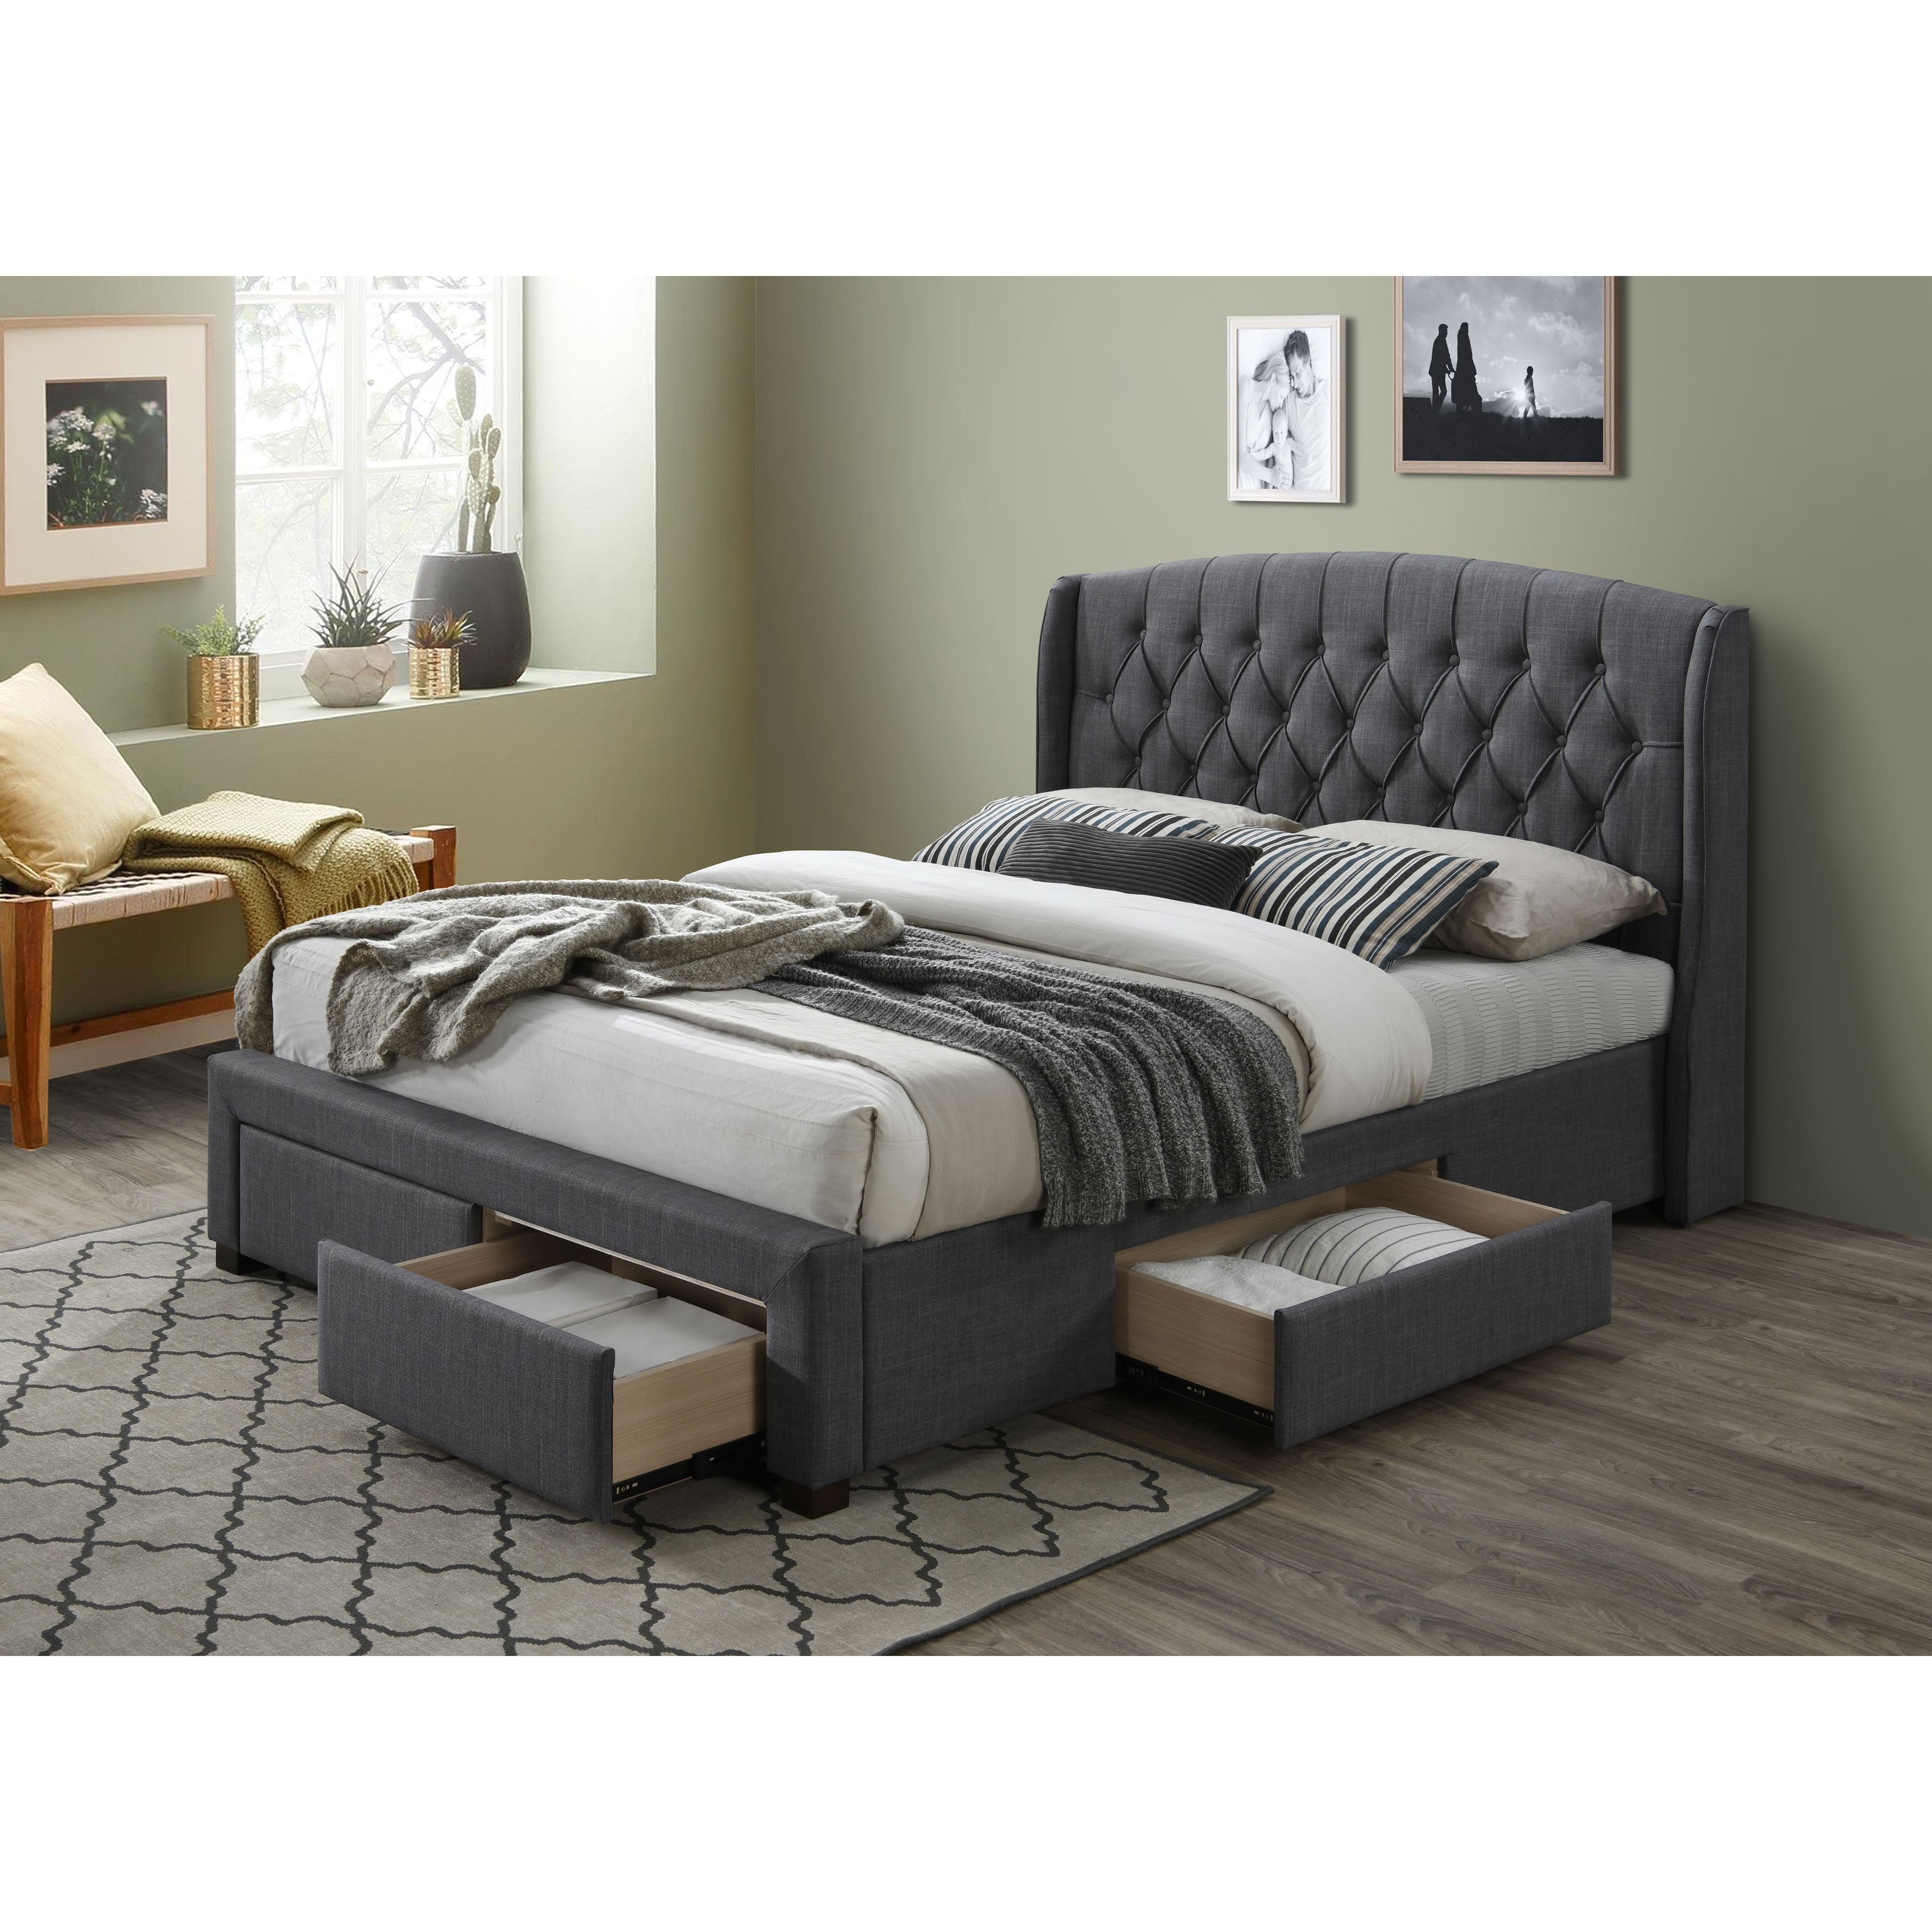 Honeydew King Size Bed Frame Timber Mattress Base With Storage Drawers - Grey - SILBERSHELL